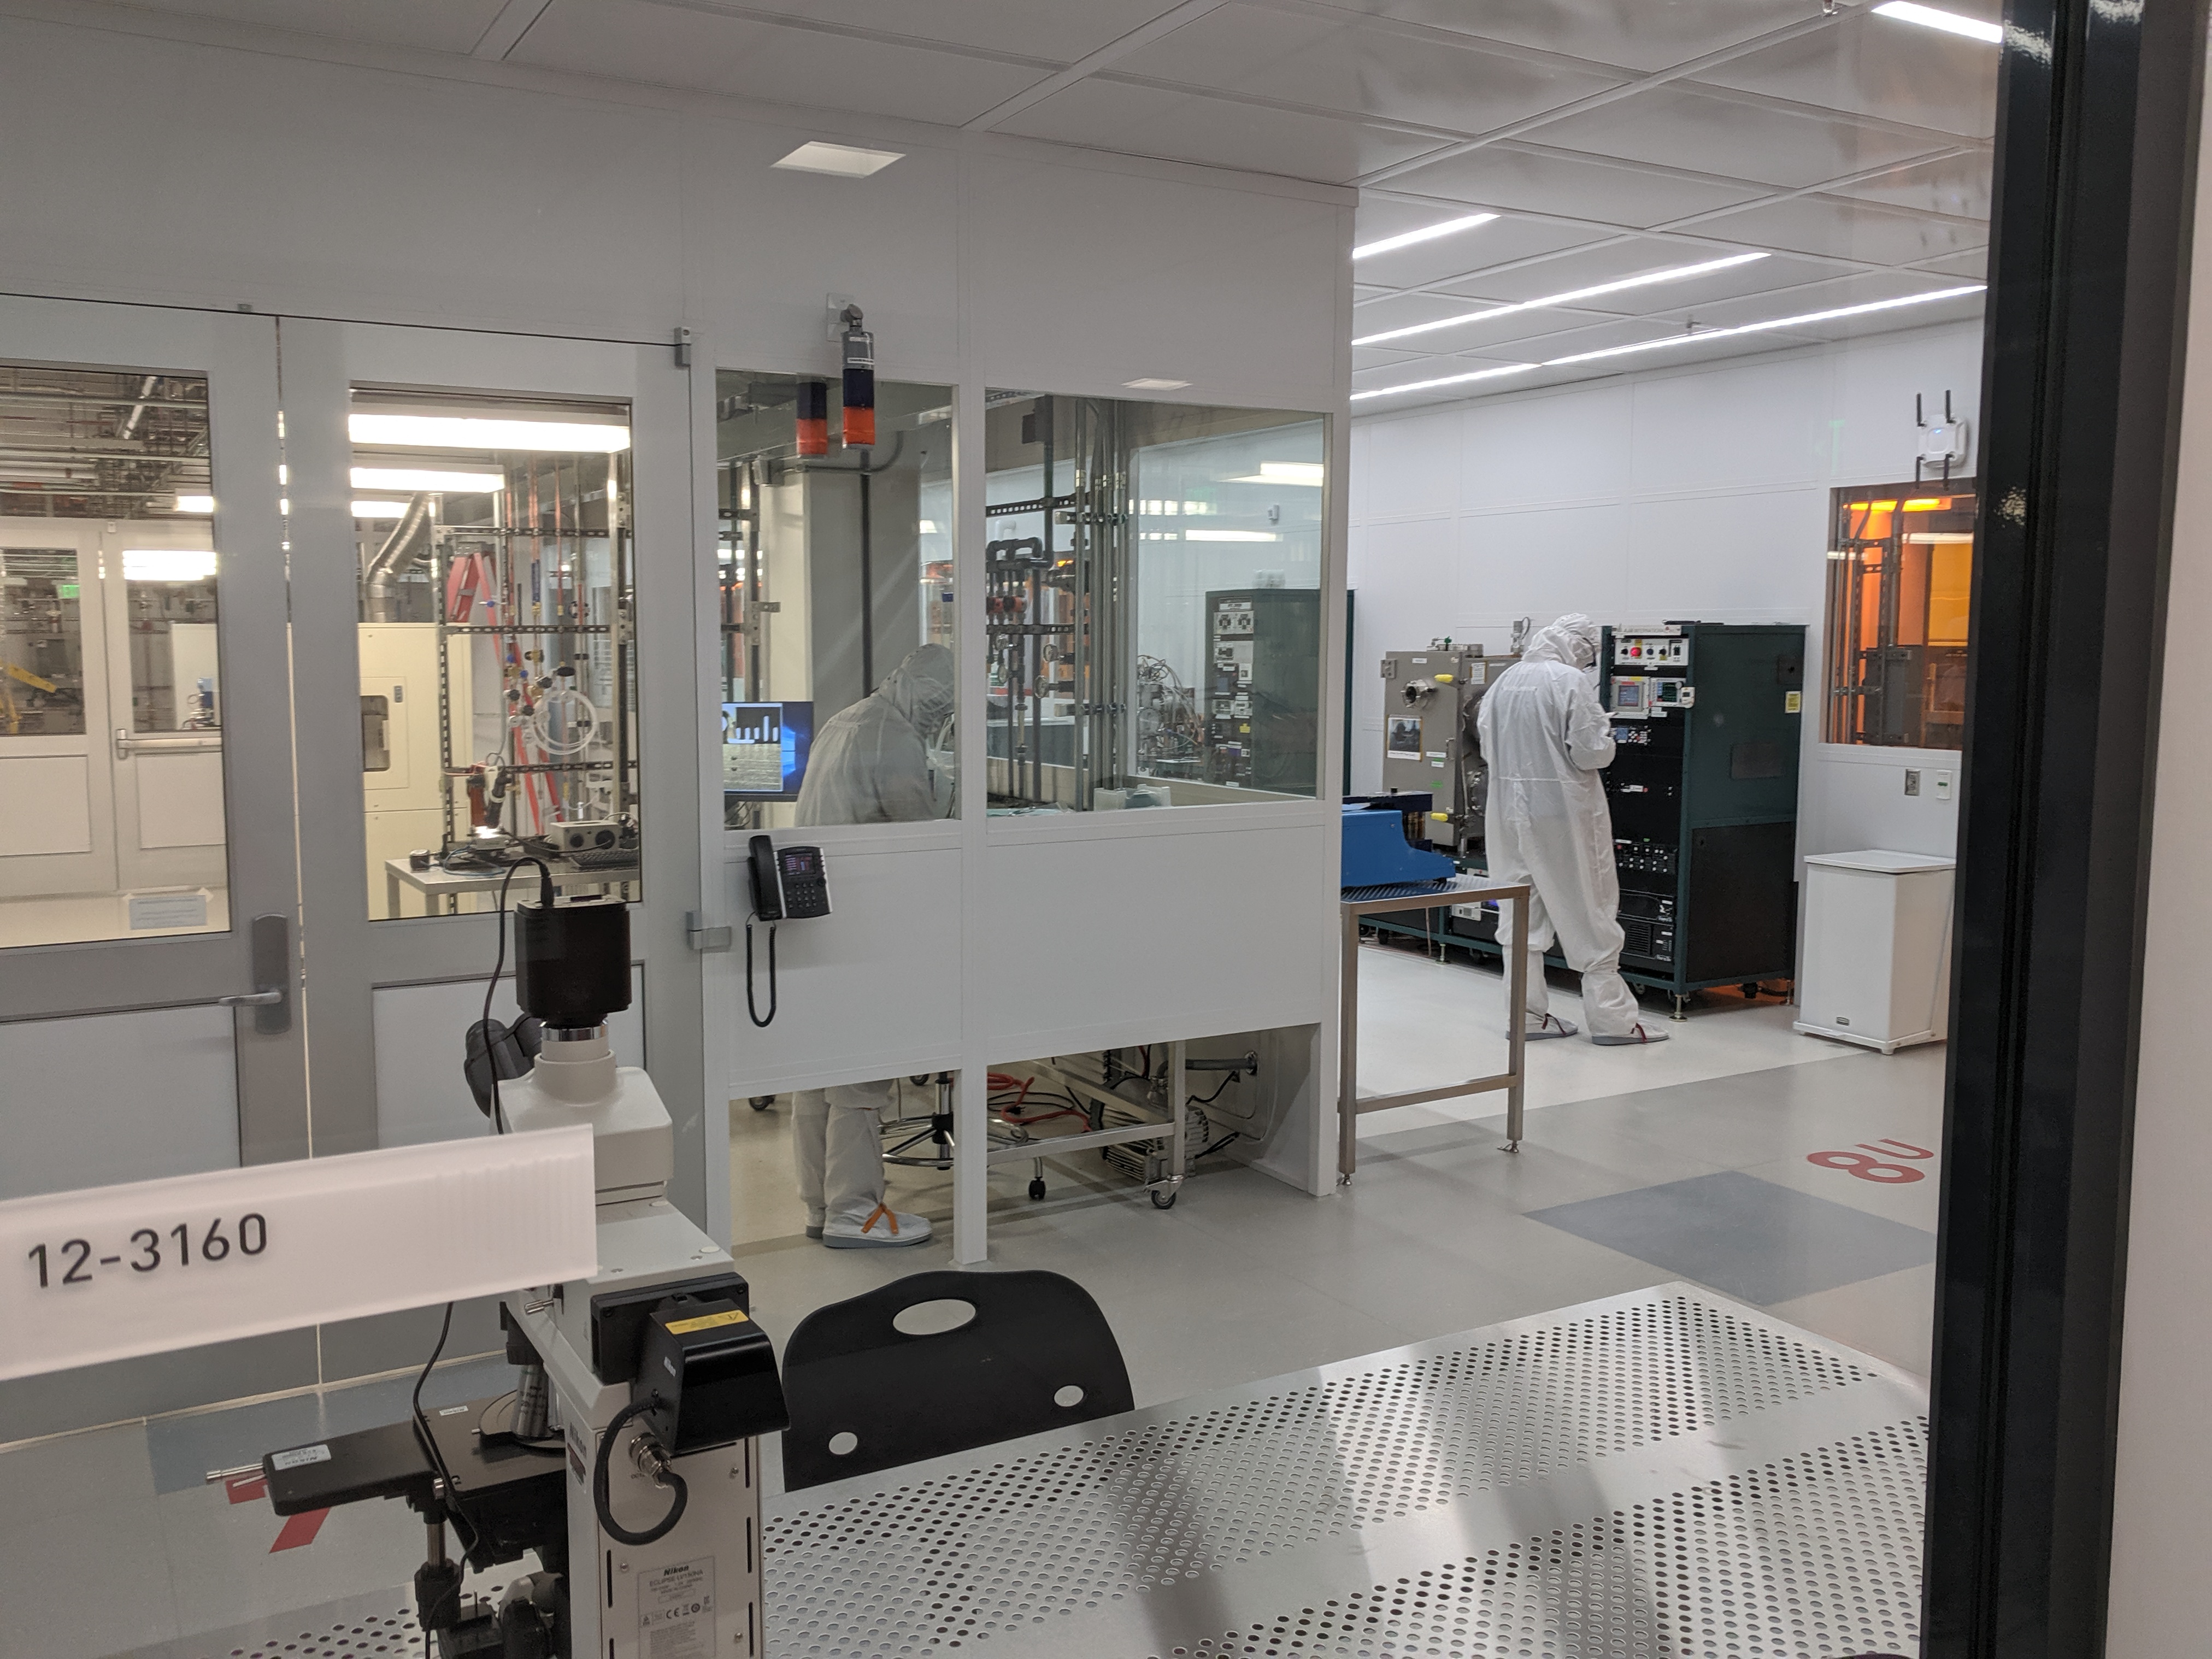 a view into the cleanroom